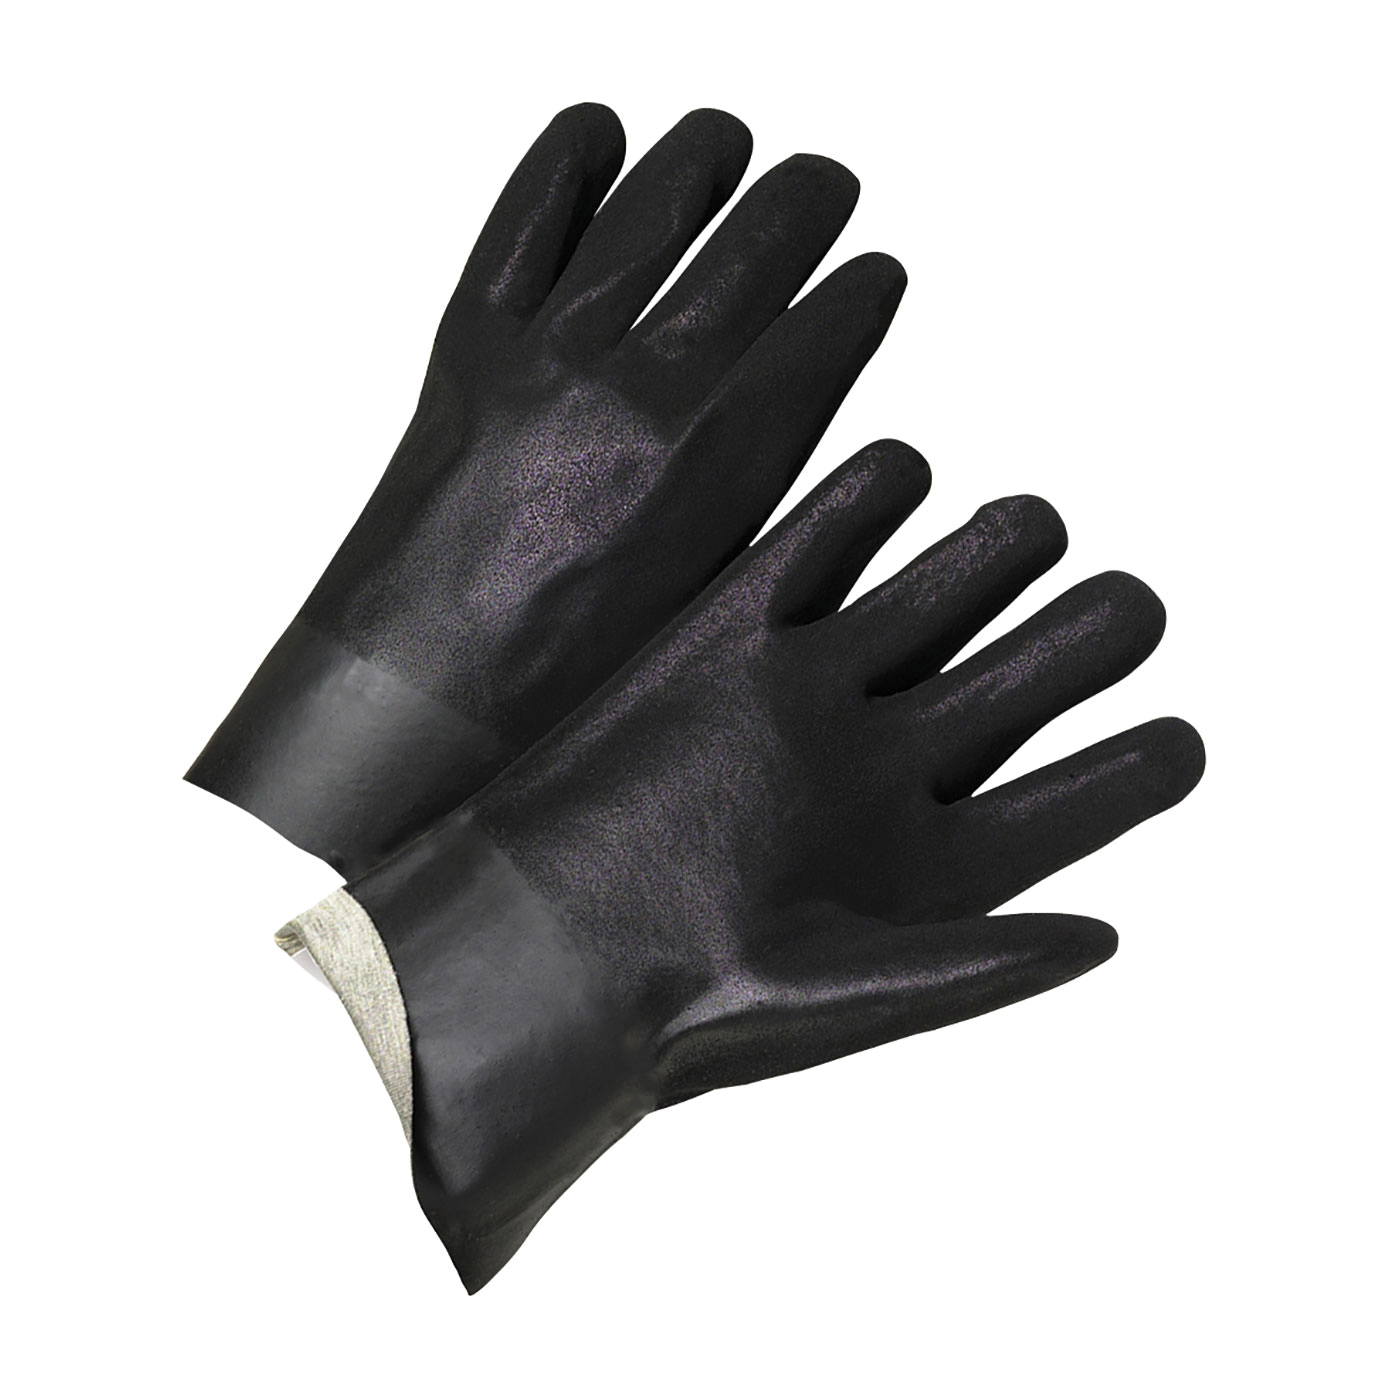 PIP® 1027RF Standard Chemical-Resistant Gloves, L, Pair Hand, Cotton, Black, Cotton Interlock Knit Lining, 12 in L, Resists: Abrasion, Acid, Chemical, Grease, Oil, Water and Solvent, Supported Support, Gauntlet Cuff